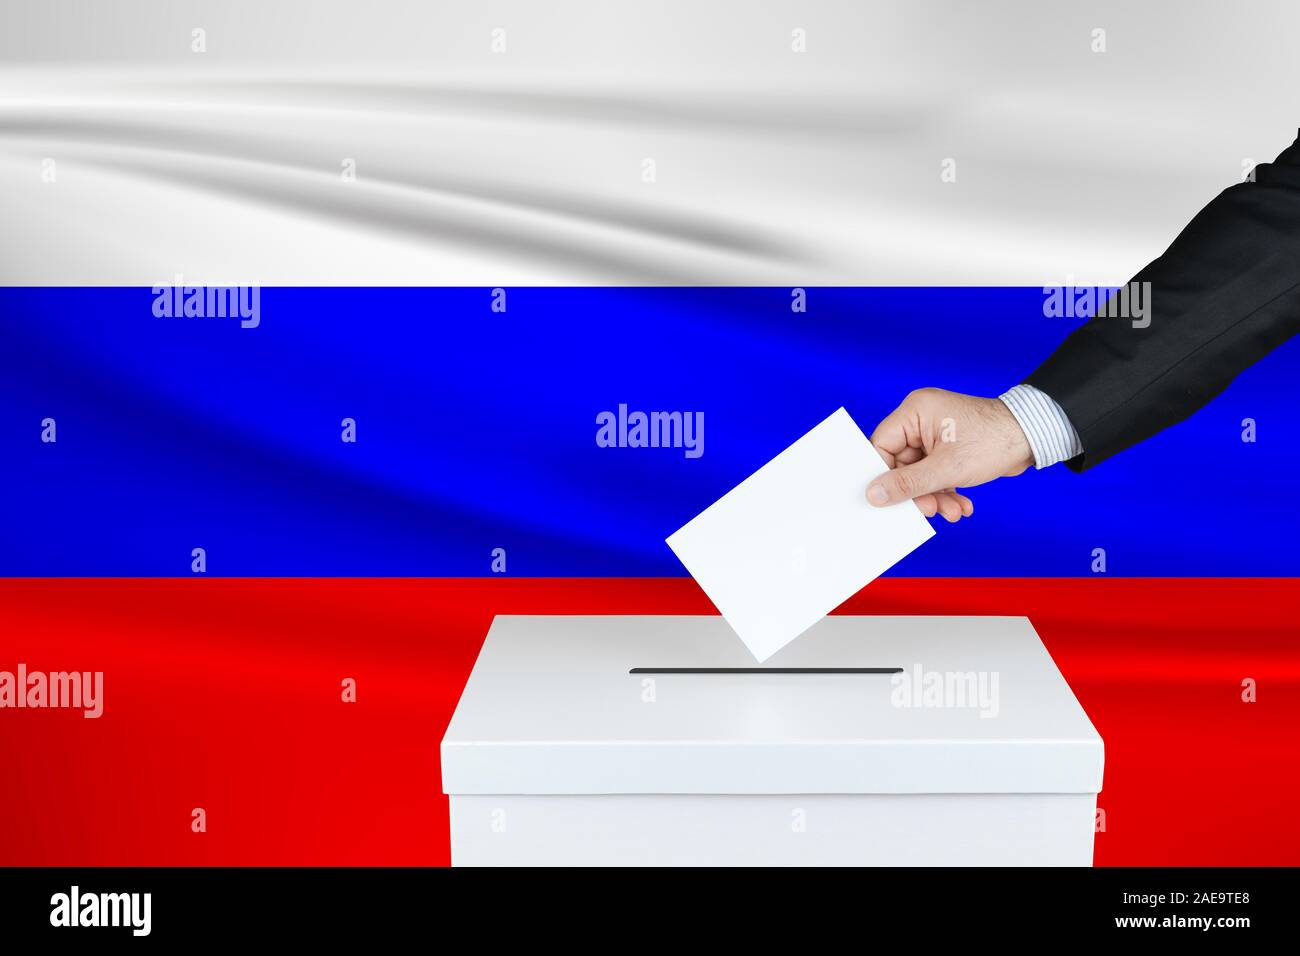 Election in Russia. The hand of man putting his vote in the ballot box. Waved Russia flag on background. Stock Photo